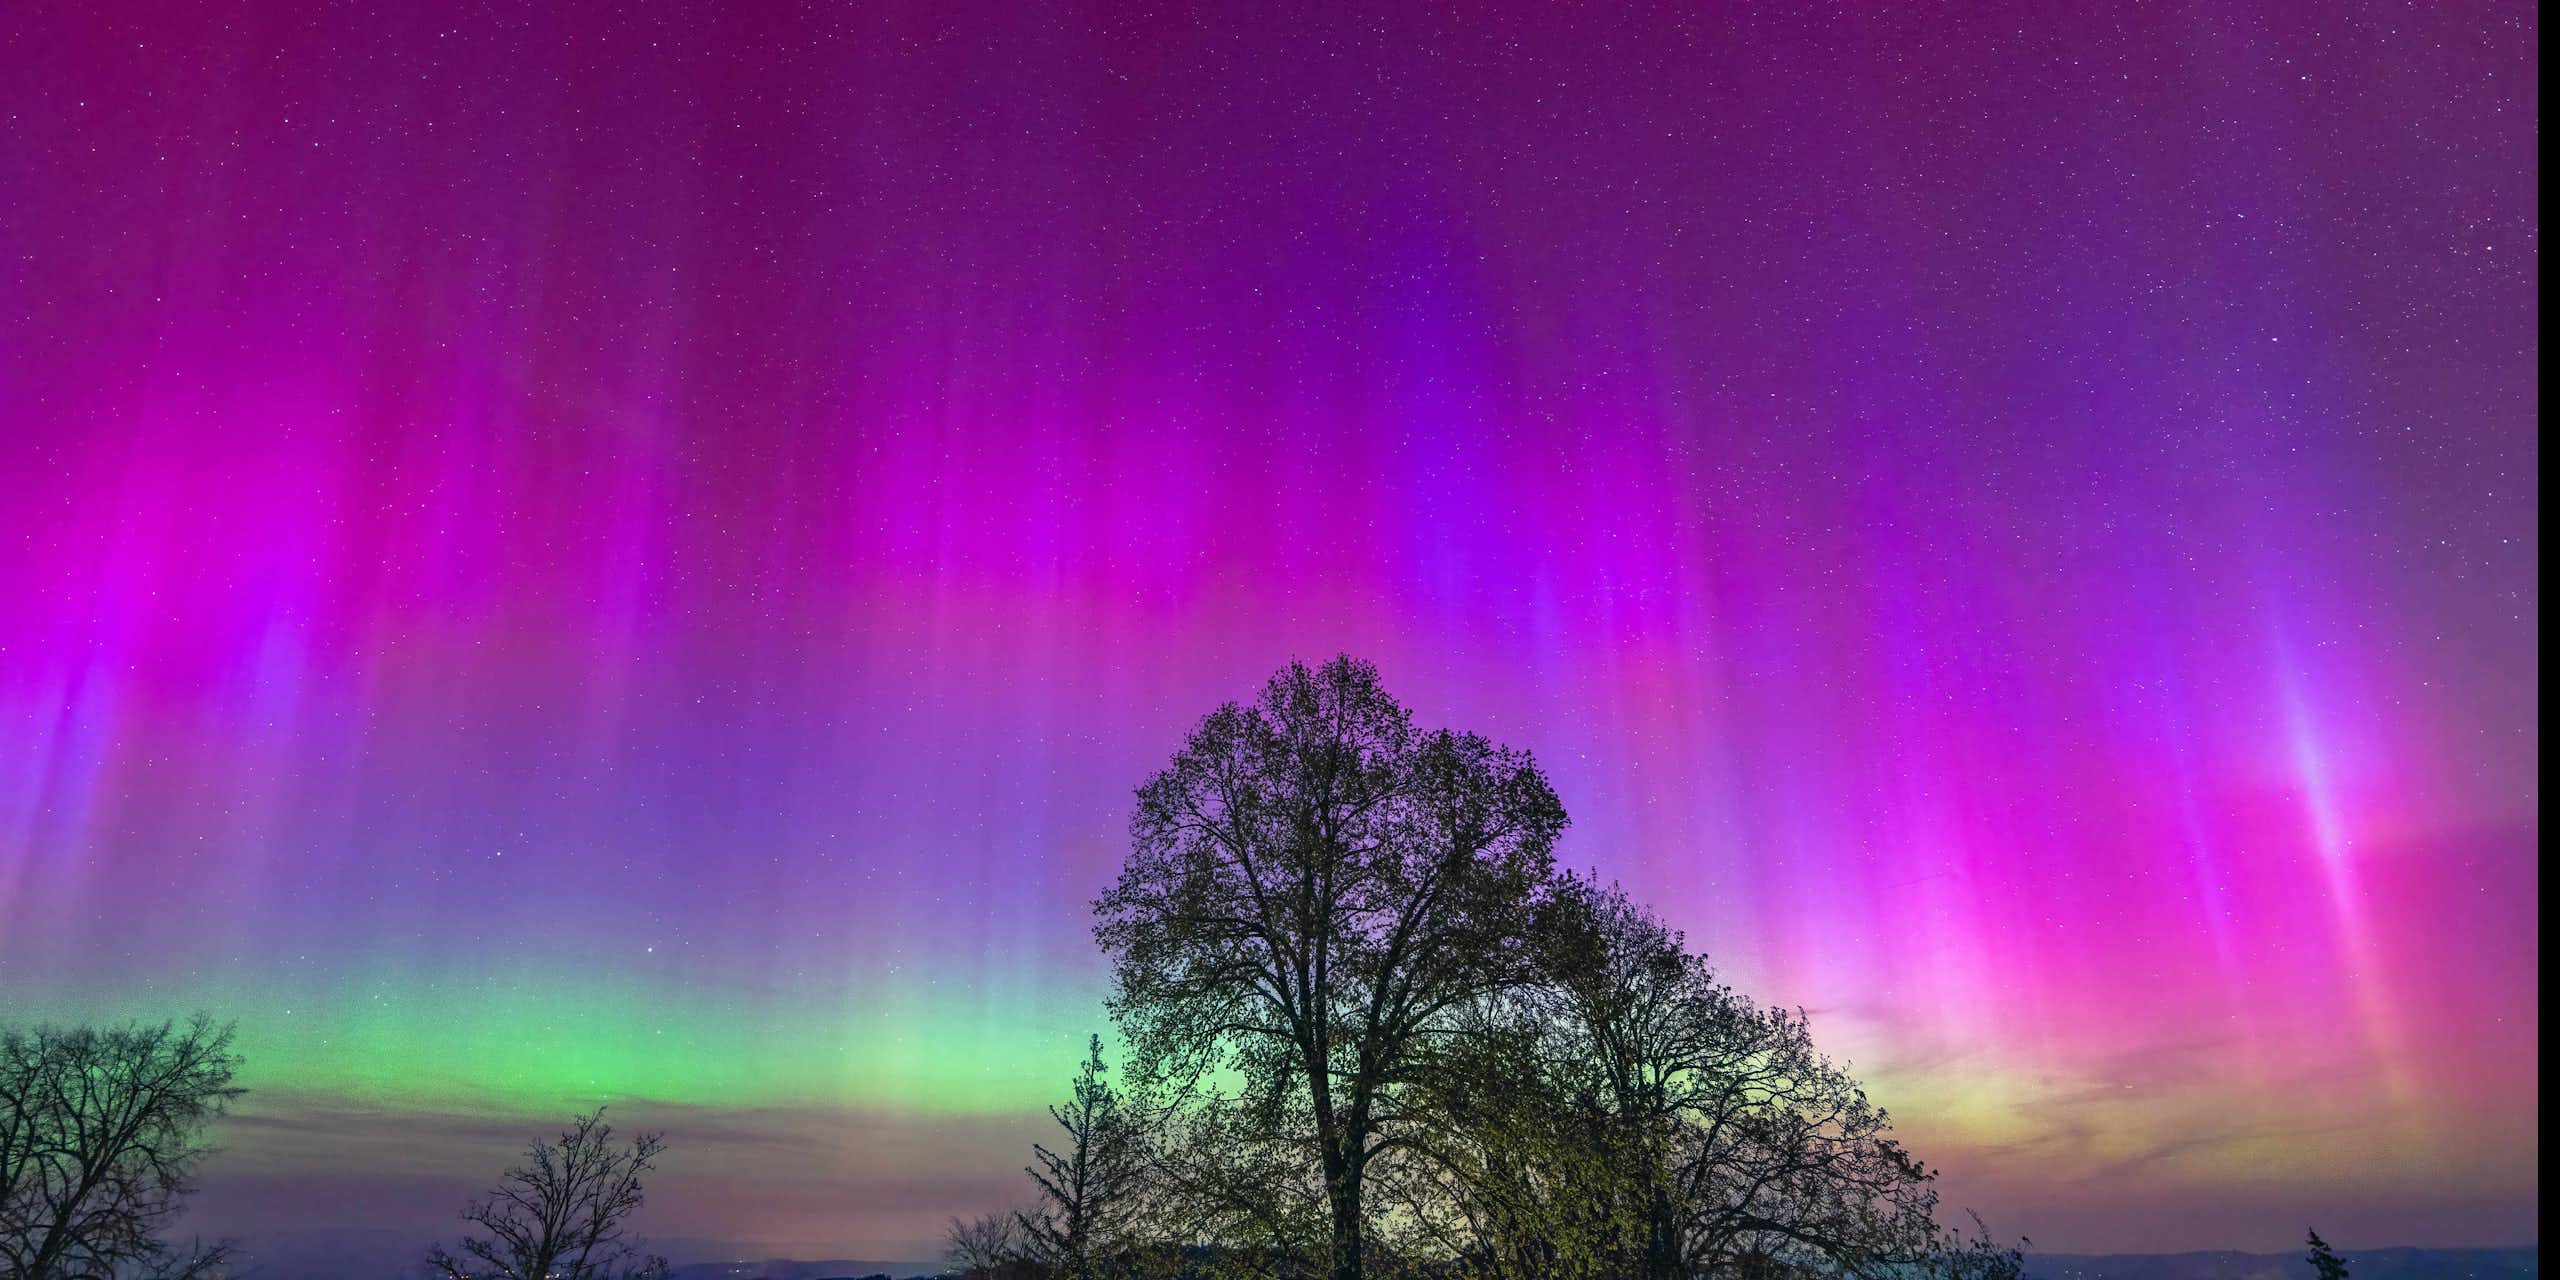 Sheets of pink and green auroral light in the sky behind silhouetted trees.